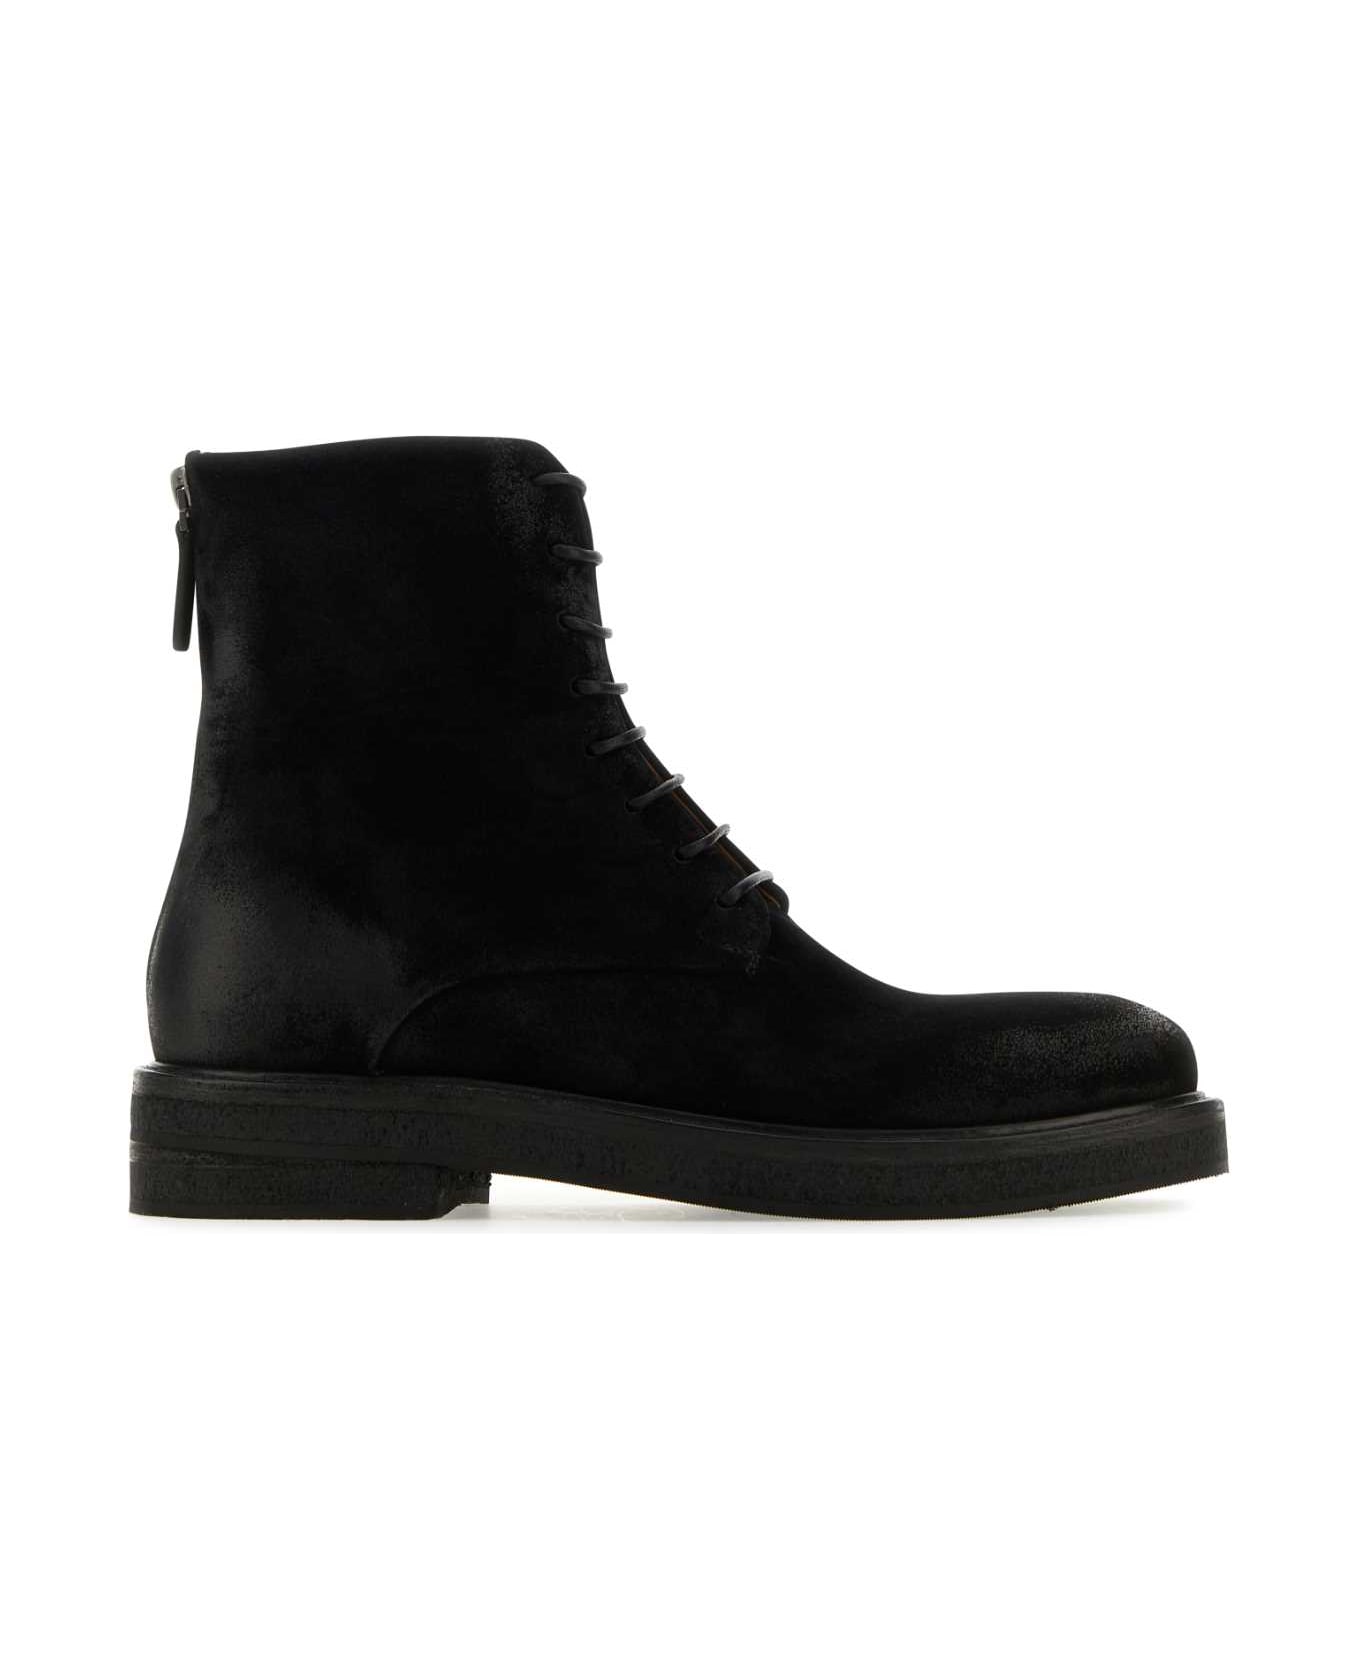 Marsell Black Suede Ankle Boots - BLACK